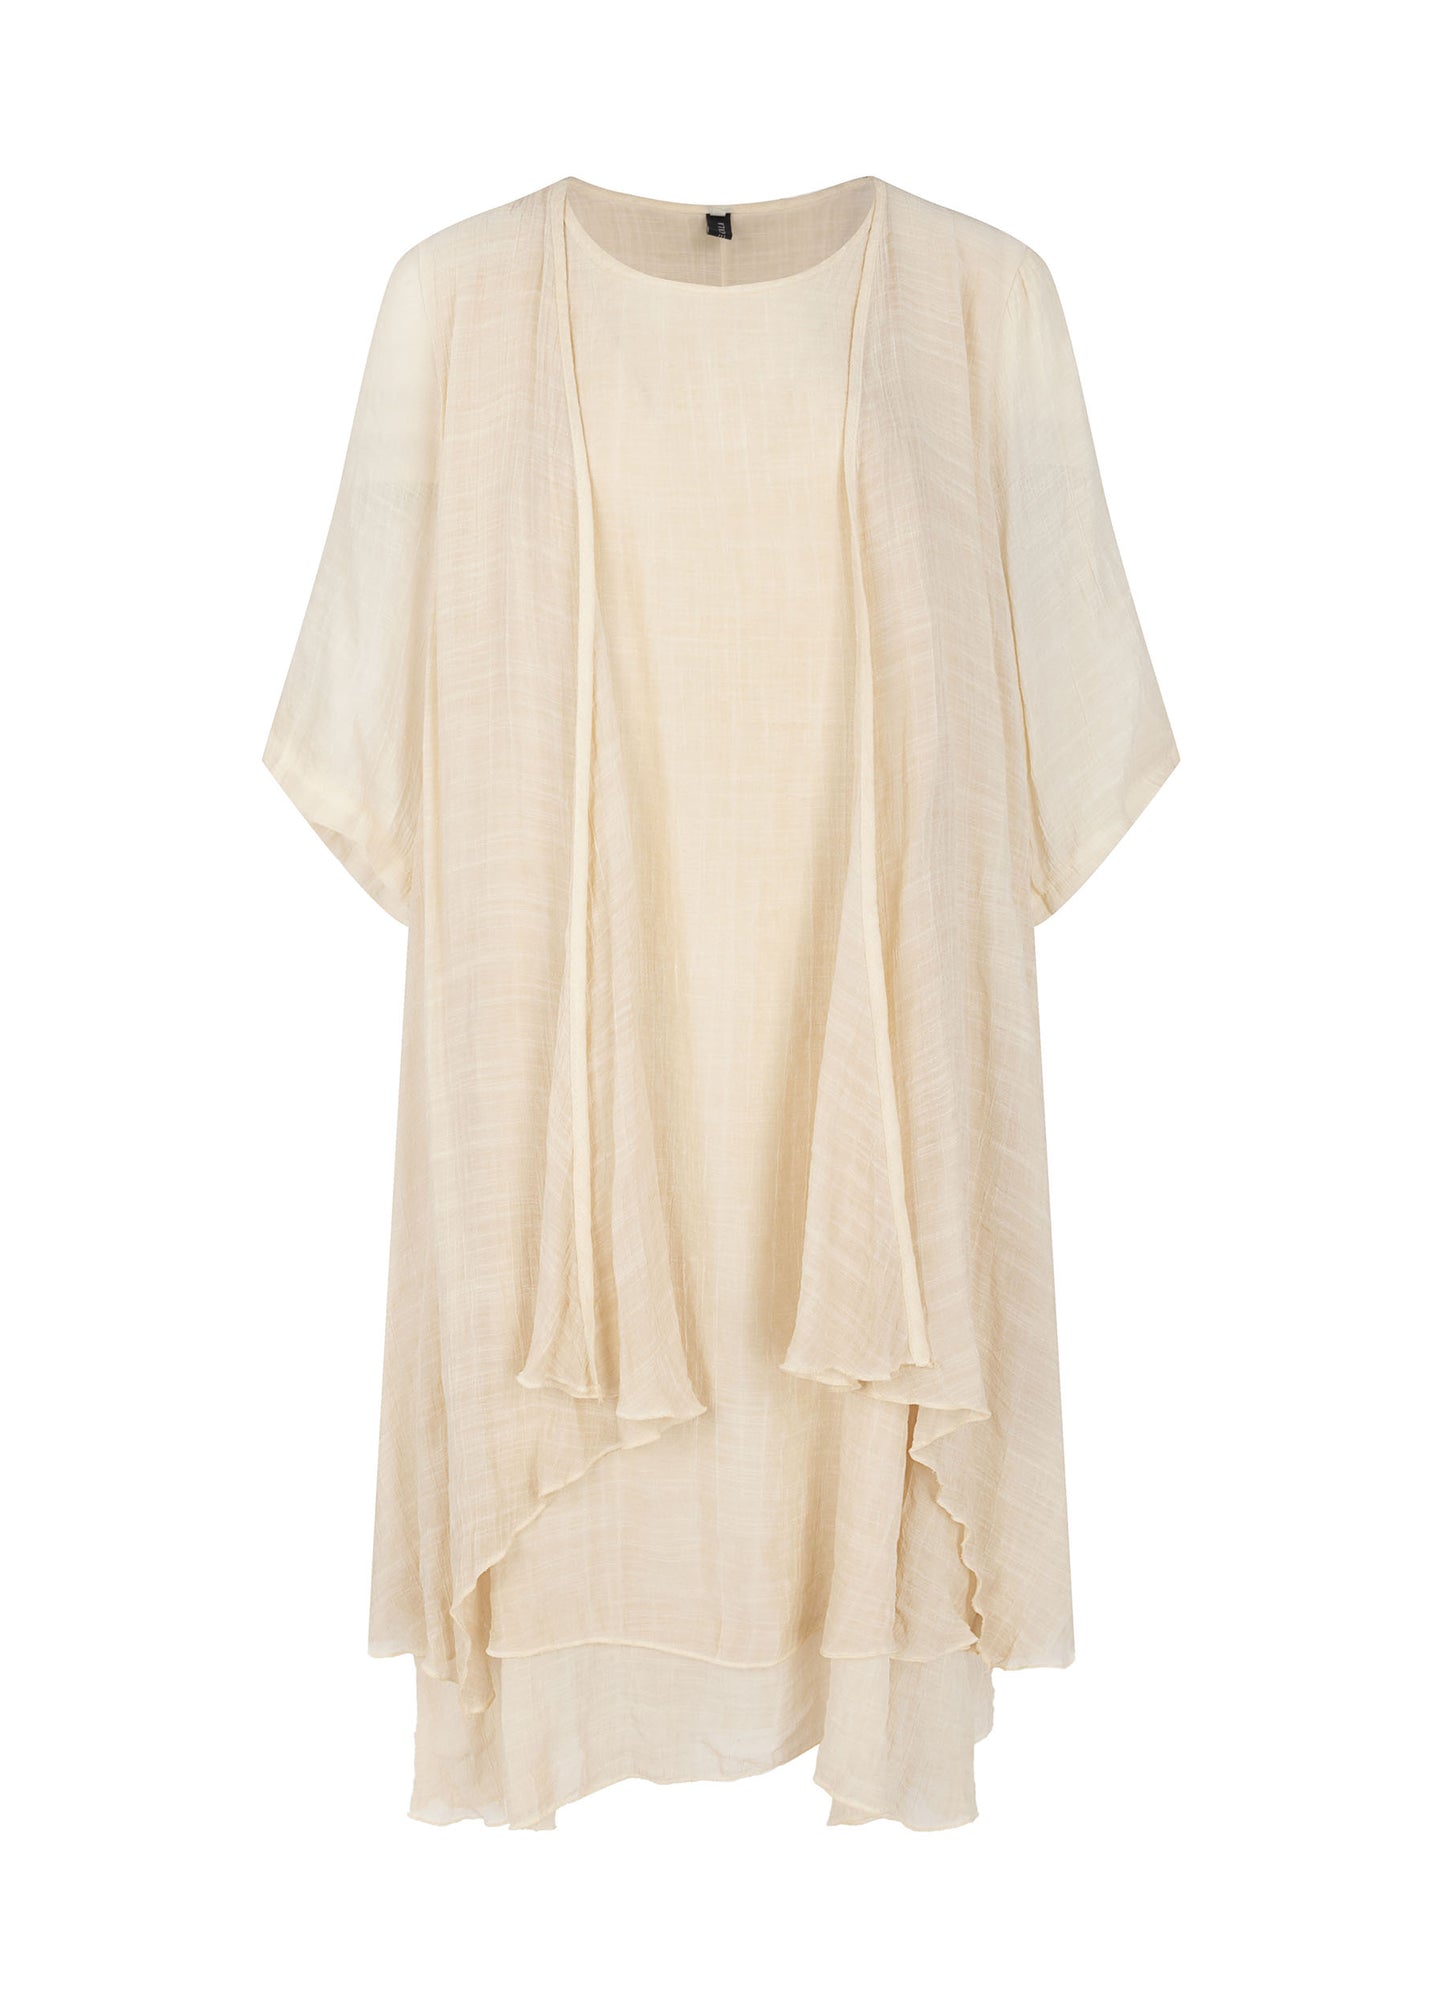 MECALA Women's Beige Cardigan Dress with Wooden Feather Necklace